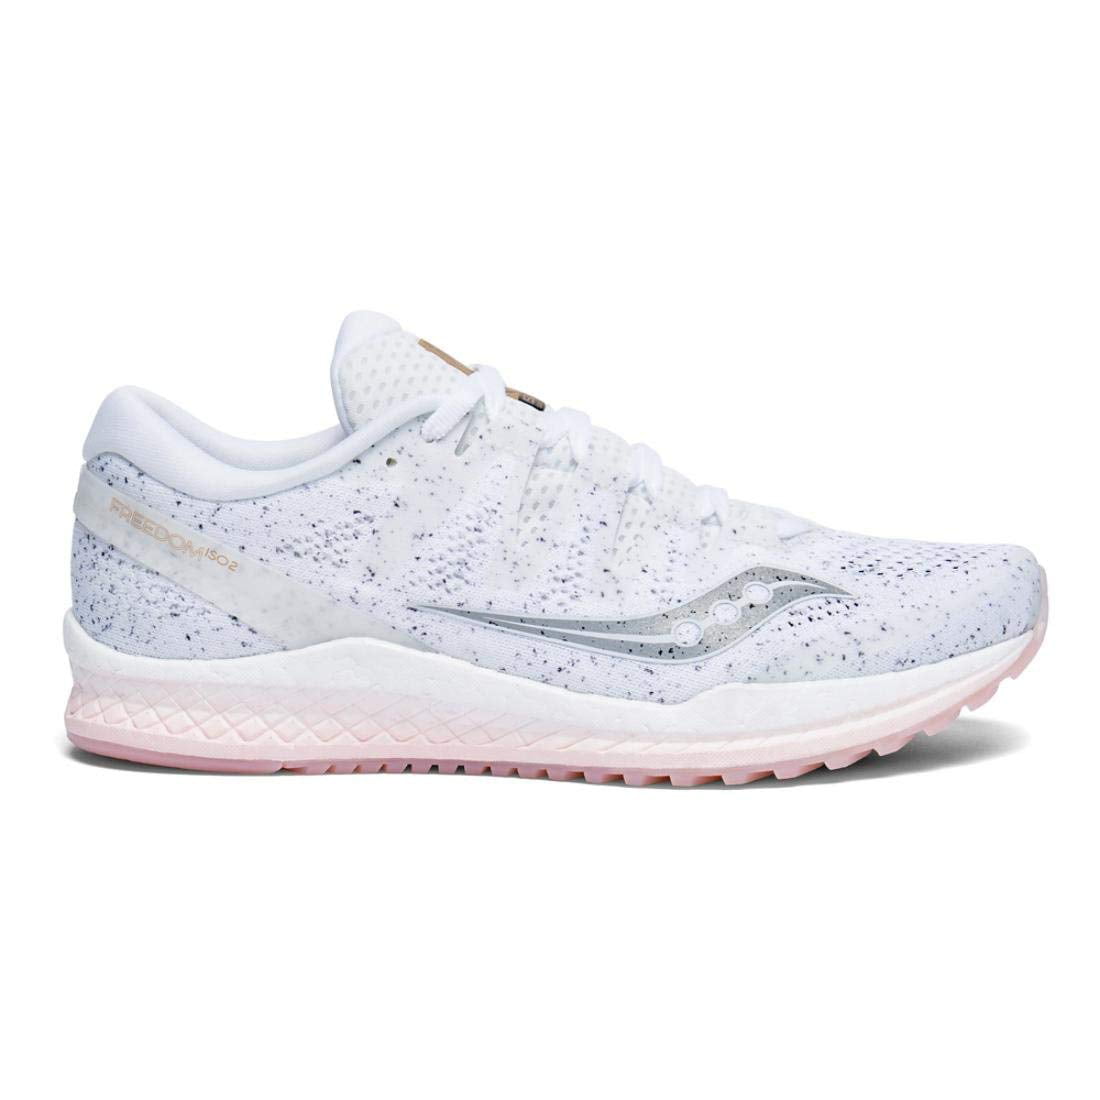 Grey Purple Saucony Womens Freedom ISO 2 Running Shoes Trainers Sneakers 